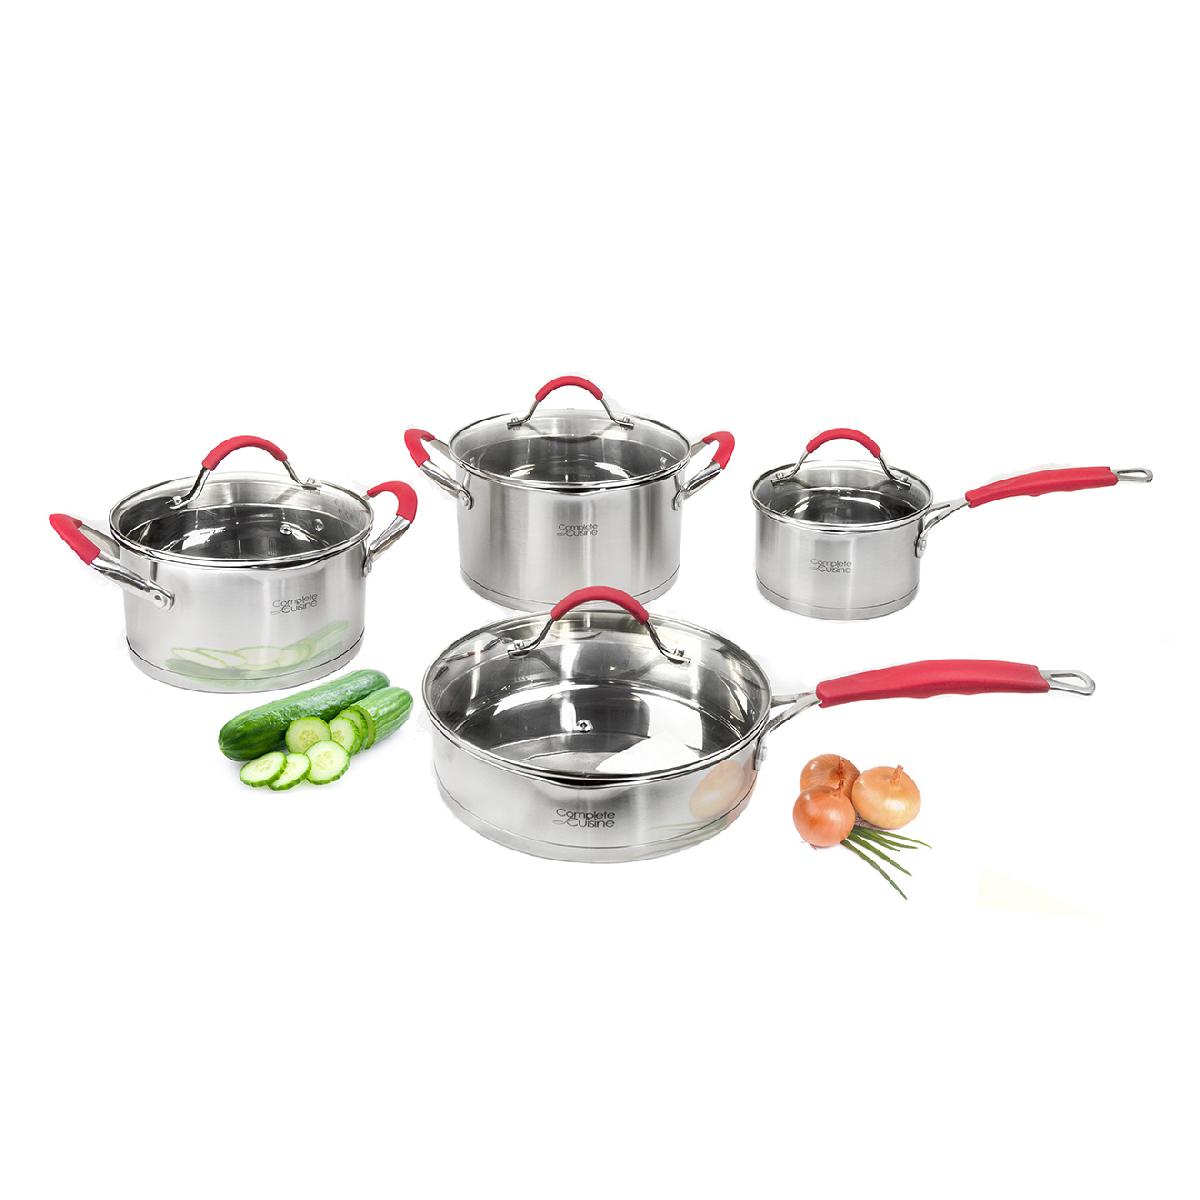 Complete Cuisine 8-Piece Stainless Steel Cookware Set